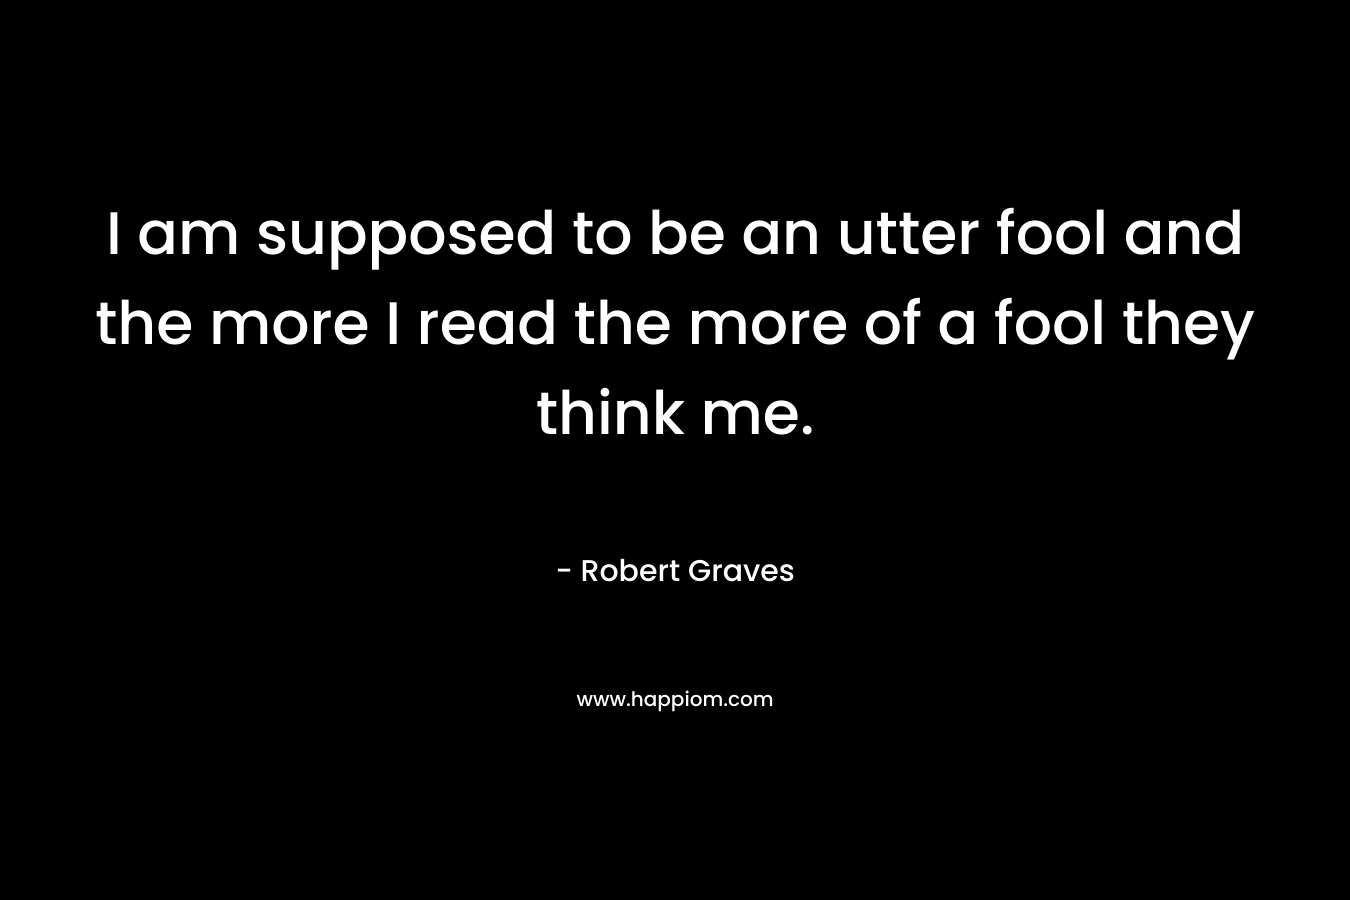 I am supposed to be an utter fool and the more I read the more of a fool they think me. – Robert Graves